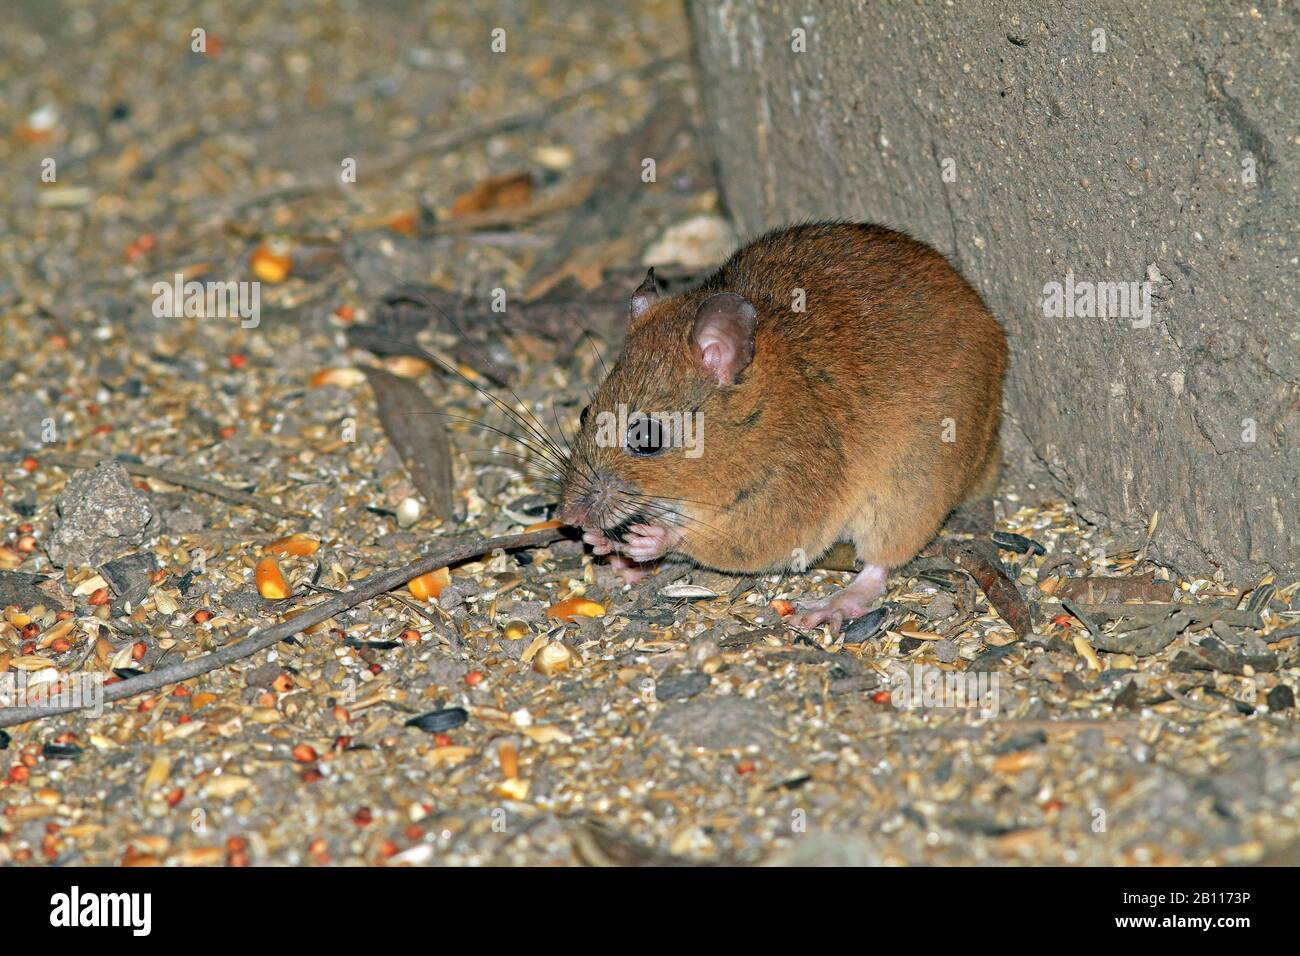 Fawn-footed Melomys (Melomys cervinipes), feeds seeds, Australia Stock Photo